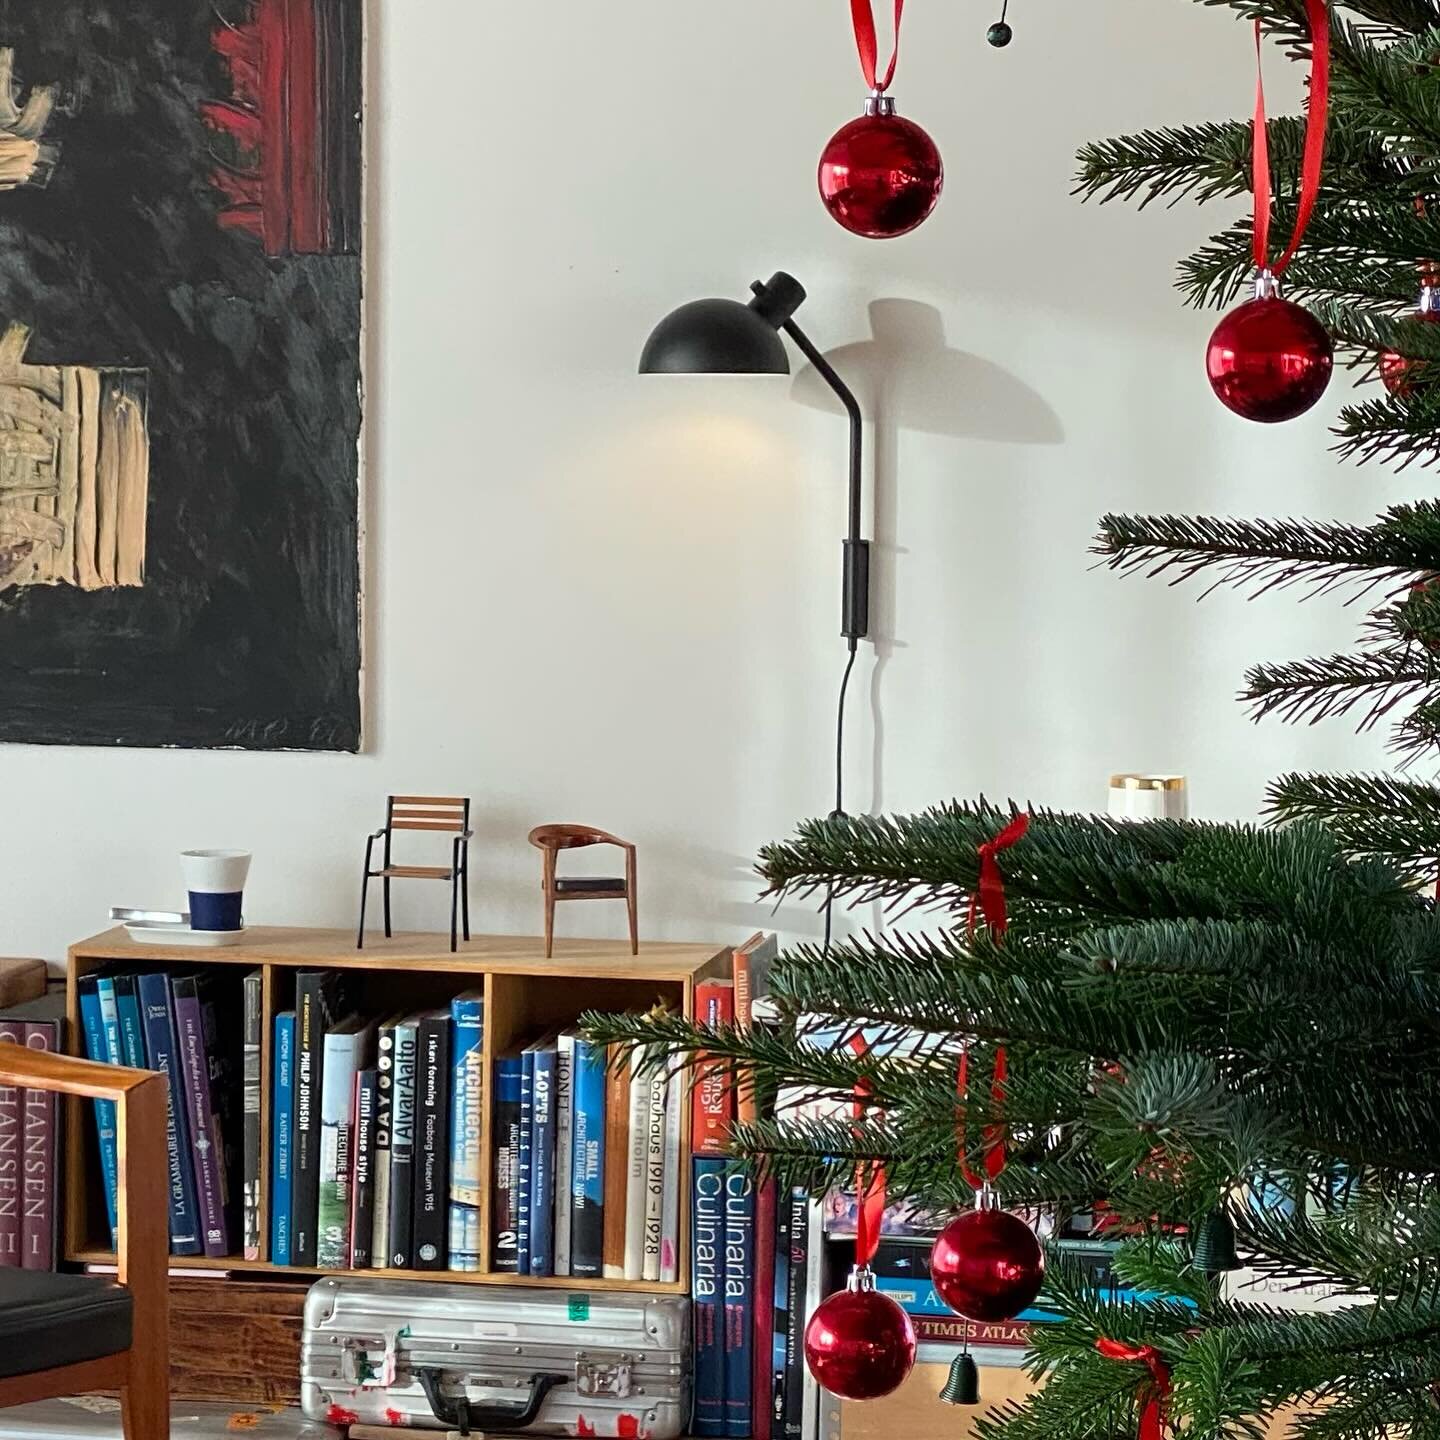 Have designed a lamp for 
Carl Hansen &amp; S&oslash;n, 
Designed in the simplest components
Half circle and cylinder
It creates logic and recognizability
&ldquo;MO310&rdquo;
 
@carlhansenandson 
@carlhansenandson_odense 
#design 
#christmas 
#lamp 
